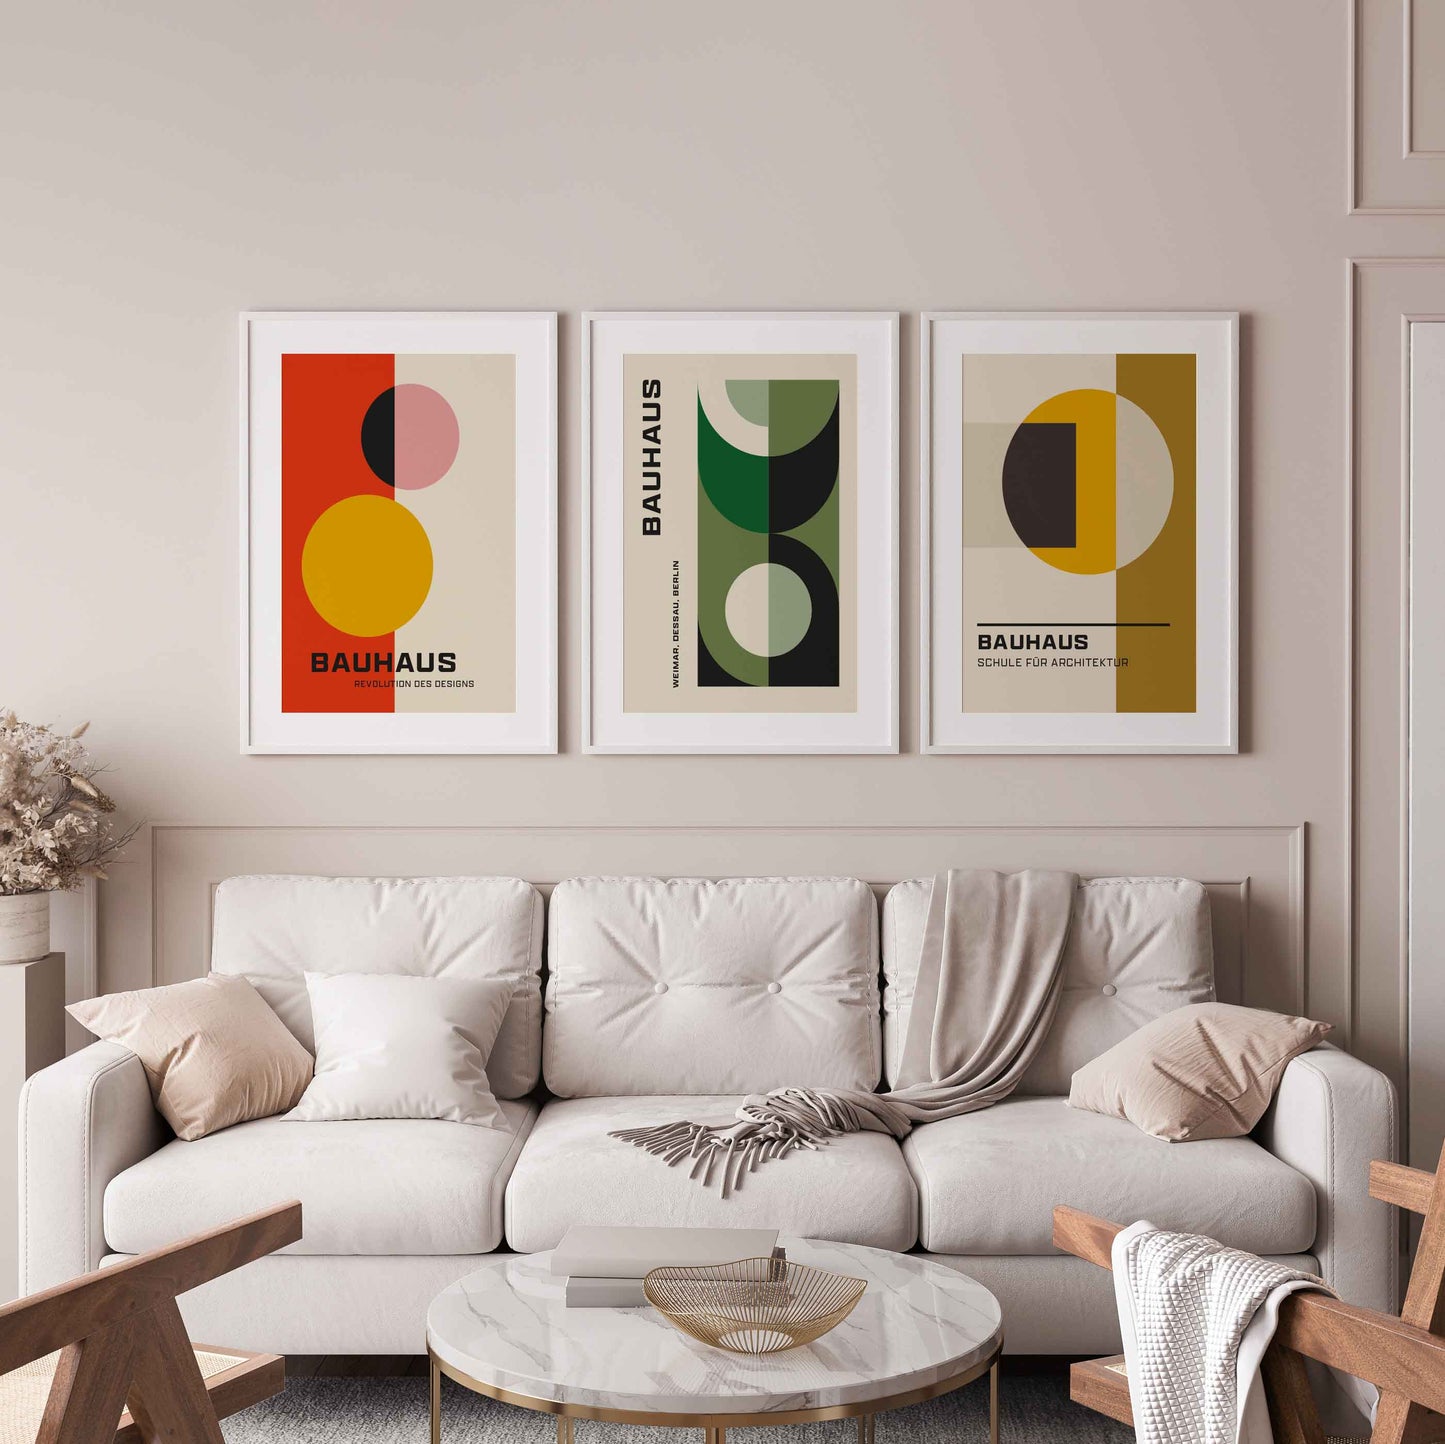 Bauhaus posters in a set of 3 in red, green and yellow